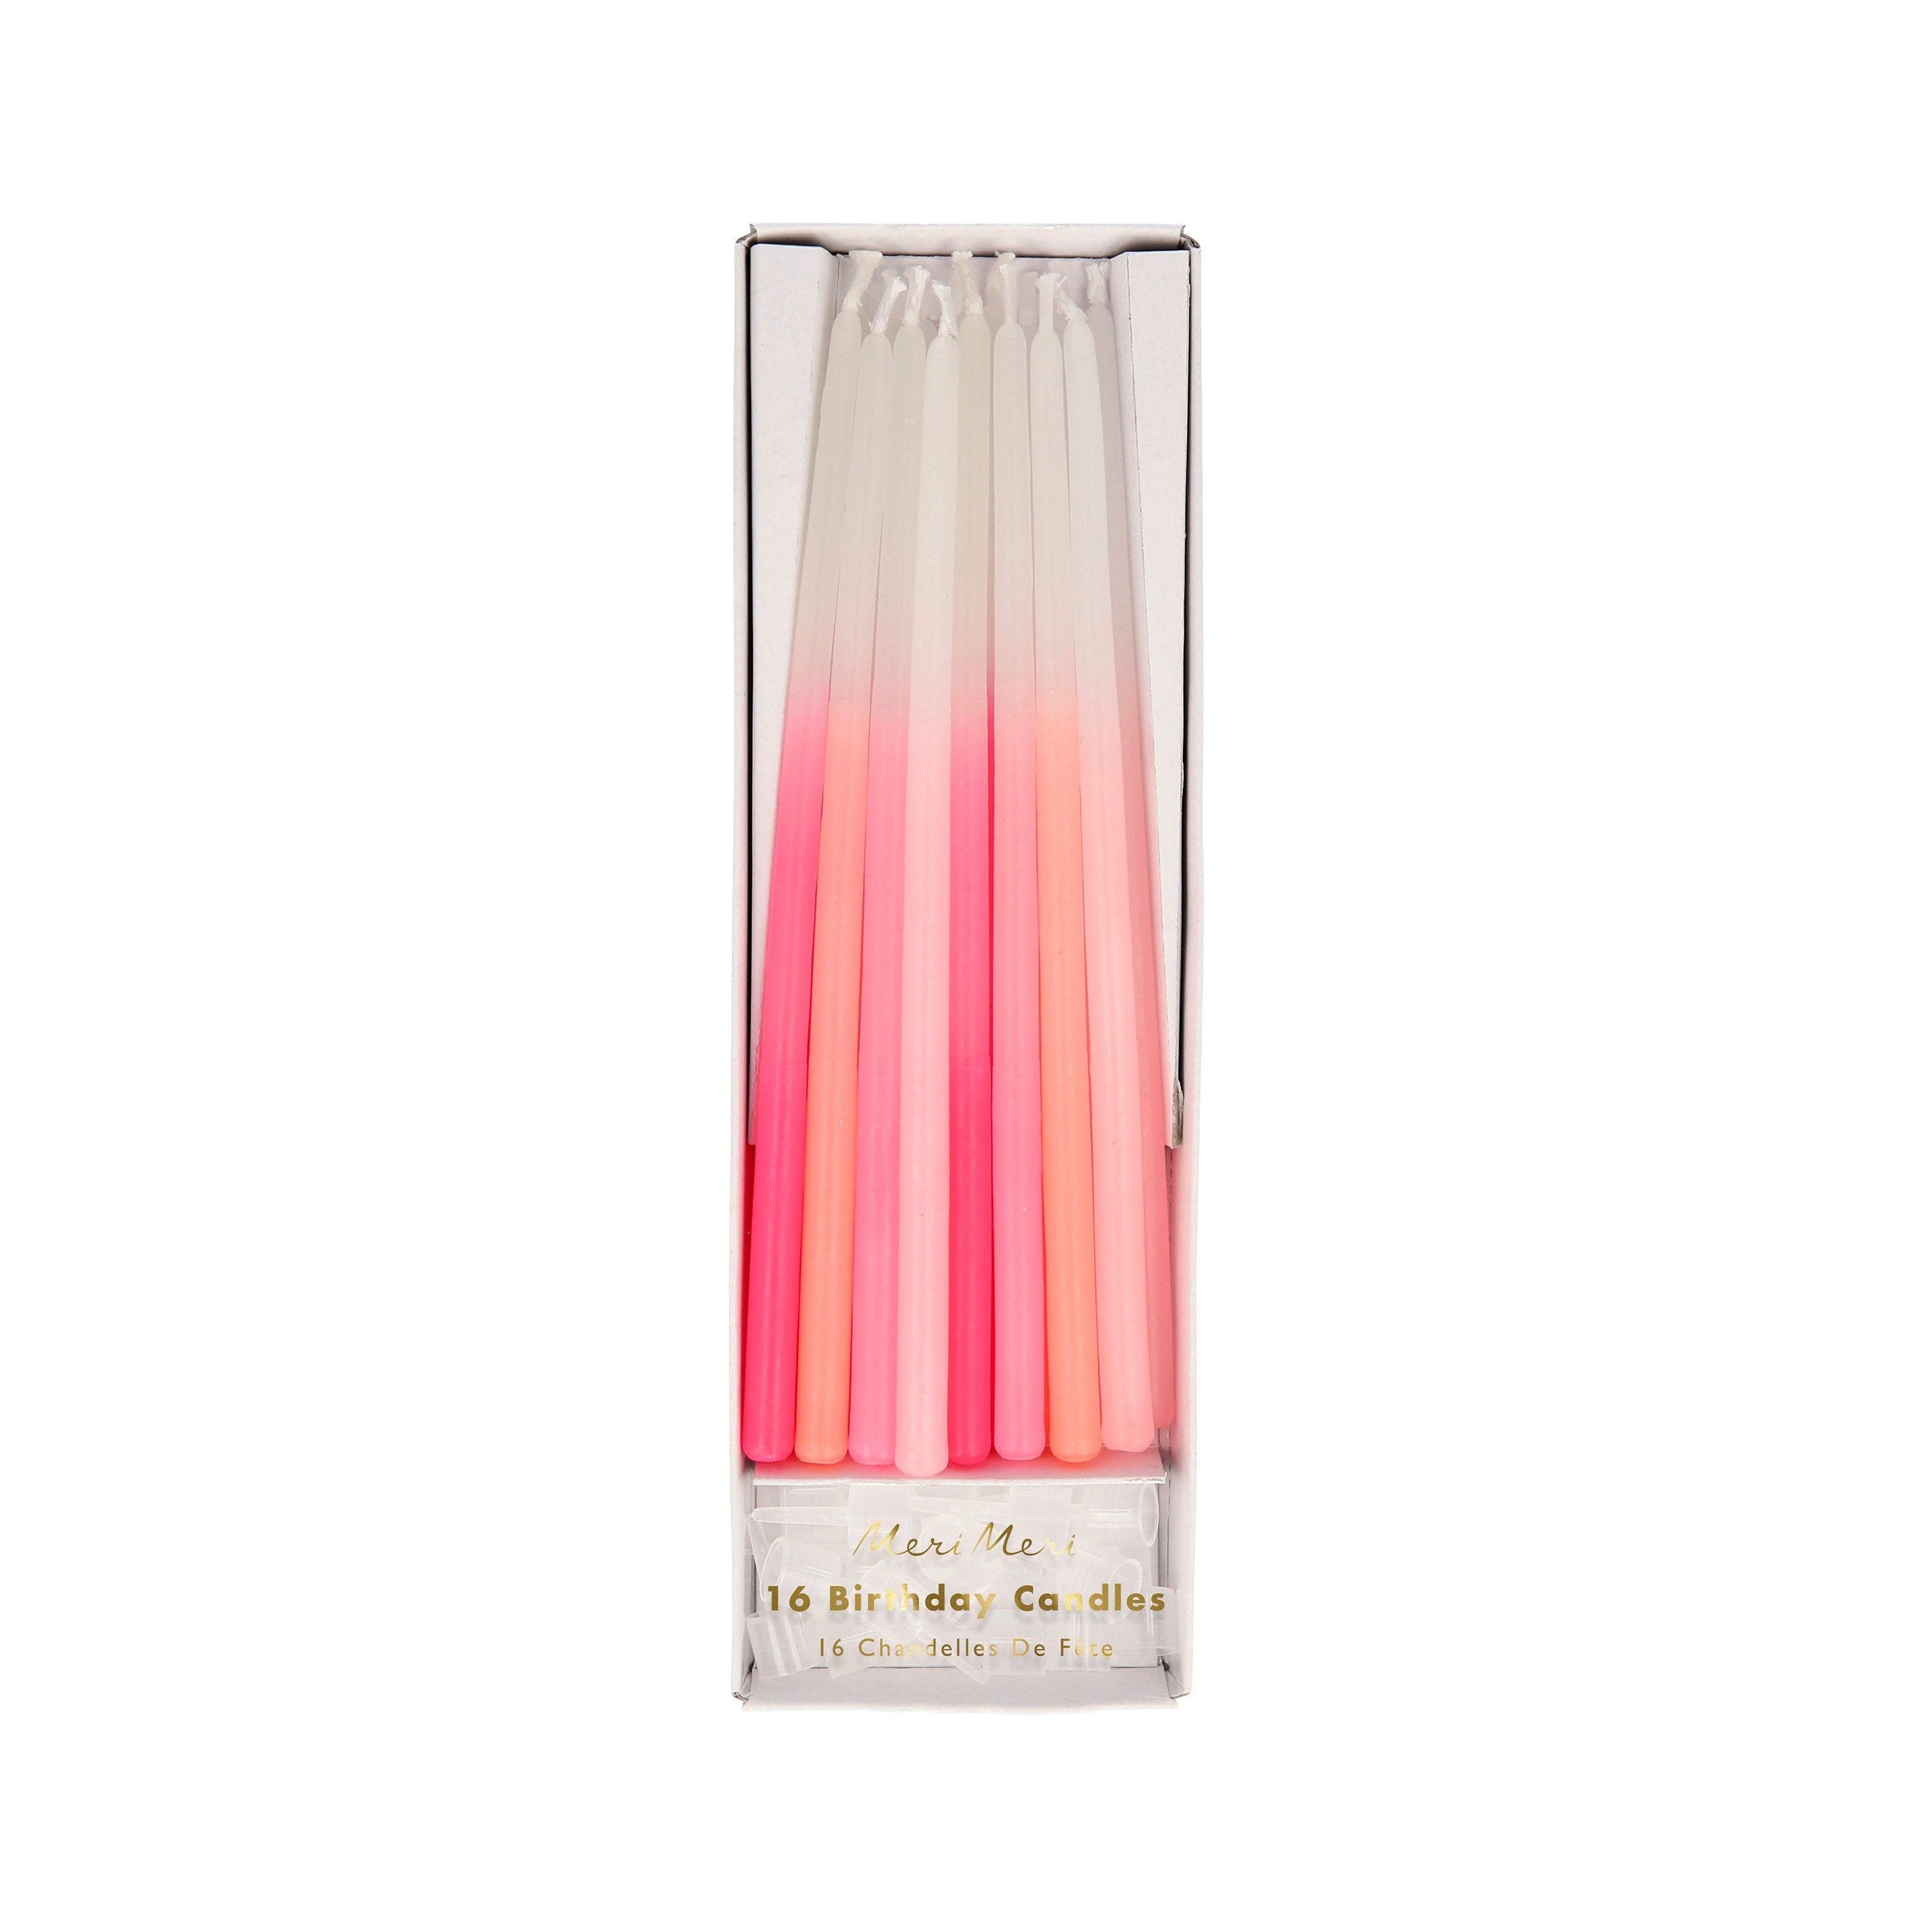 Pink Birthday Candles | Tall Birthday Candles - Cake Candle - Pink Birthday Decoration - Meri Meri Candle - Long Cake Candles - Pink Candles